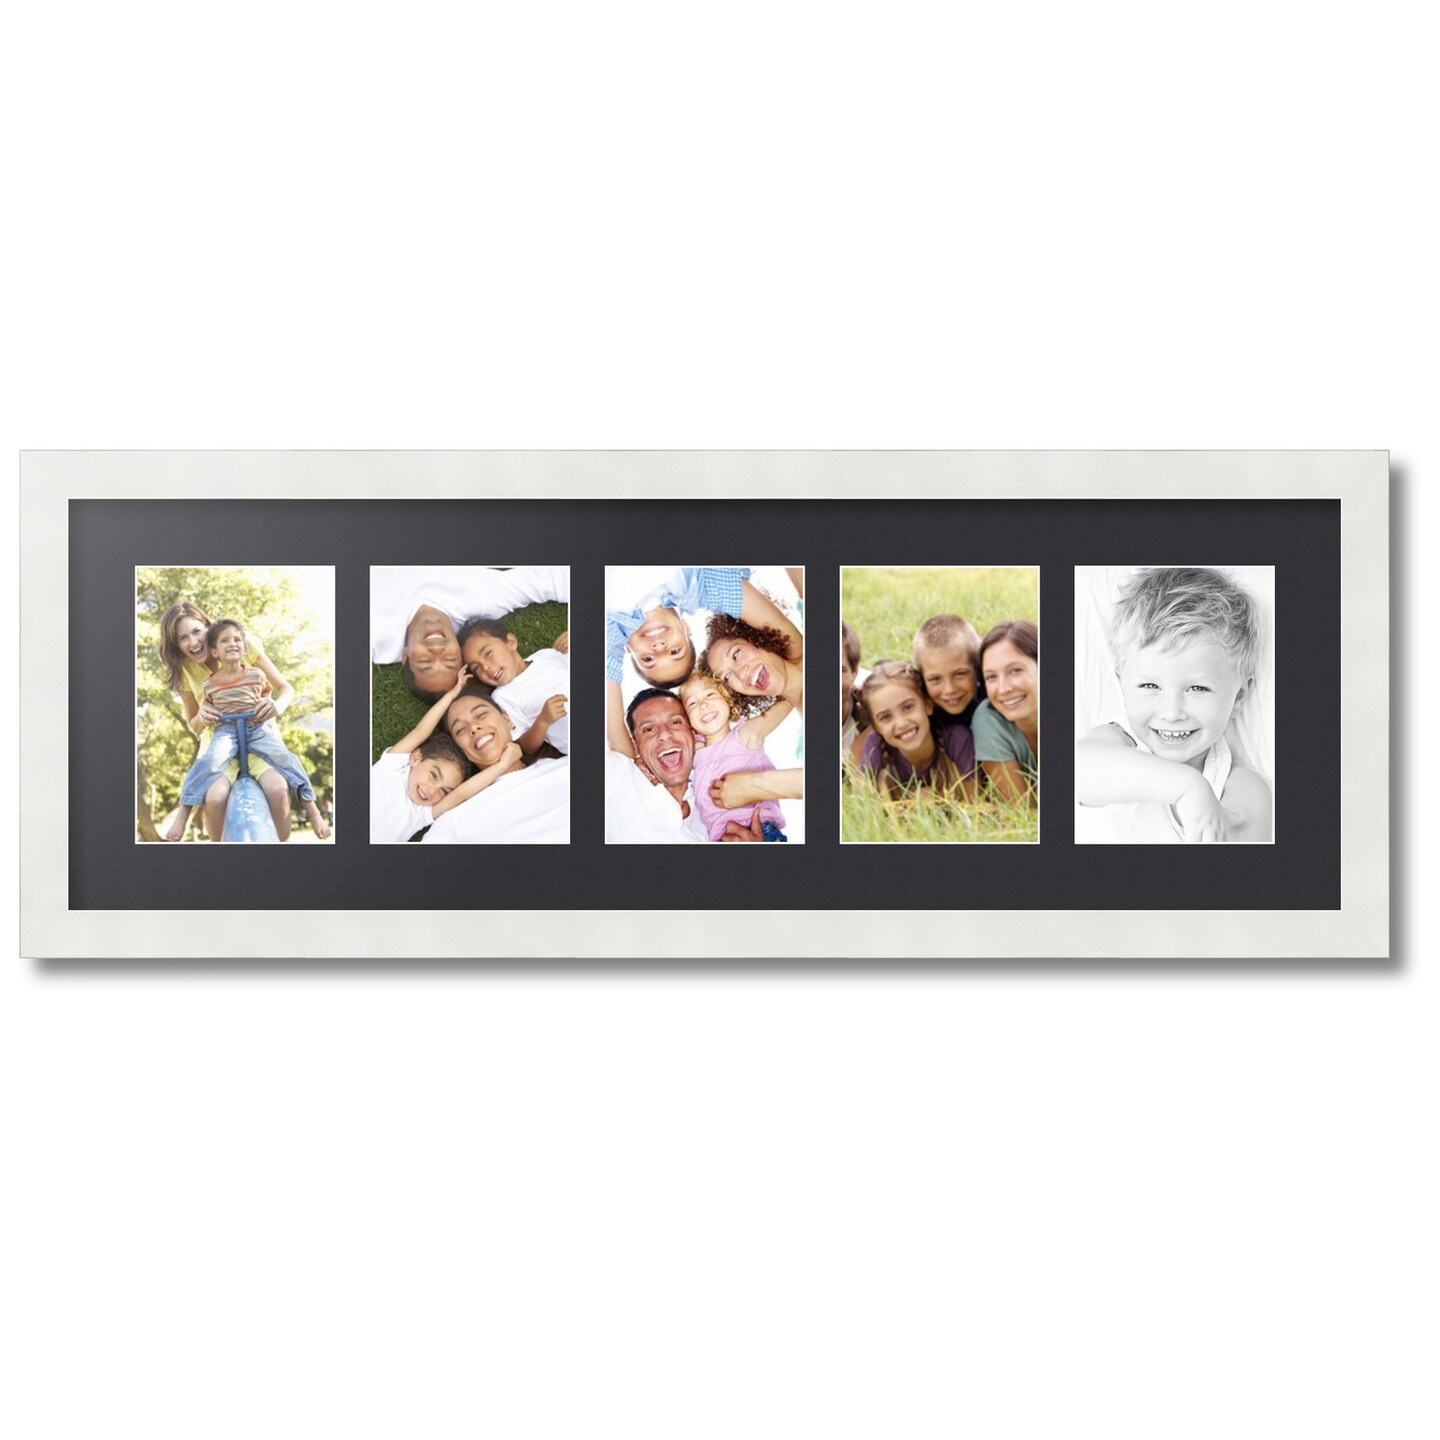 ArtToFrames Collage Photo Picture Frame with 5 - 5x7 inch Openings, Framed in White with Over 62 Mat Color Options and Plexi Glass (CSM-3966-152)